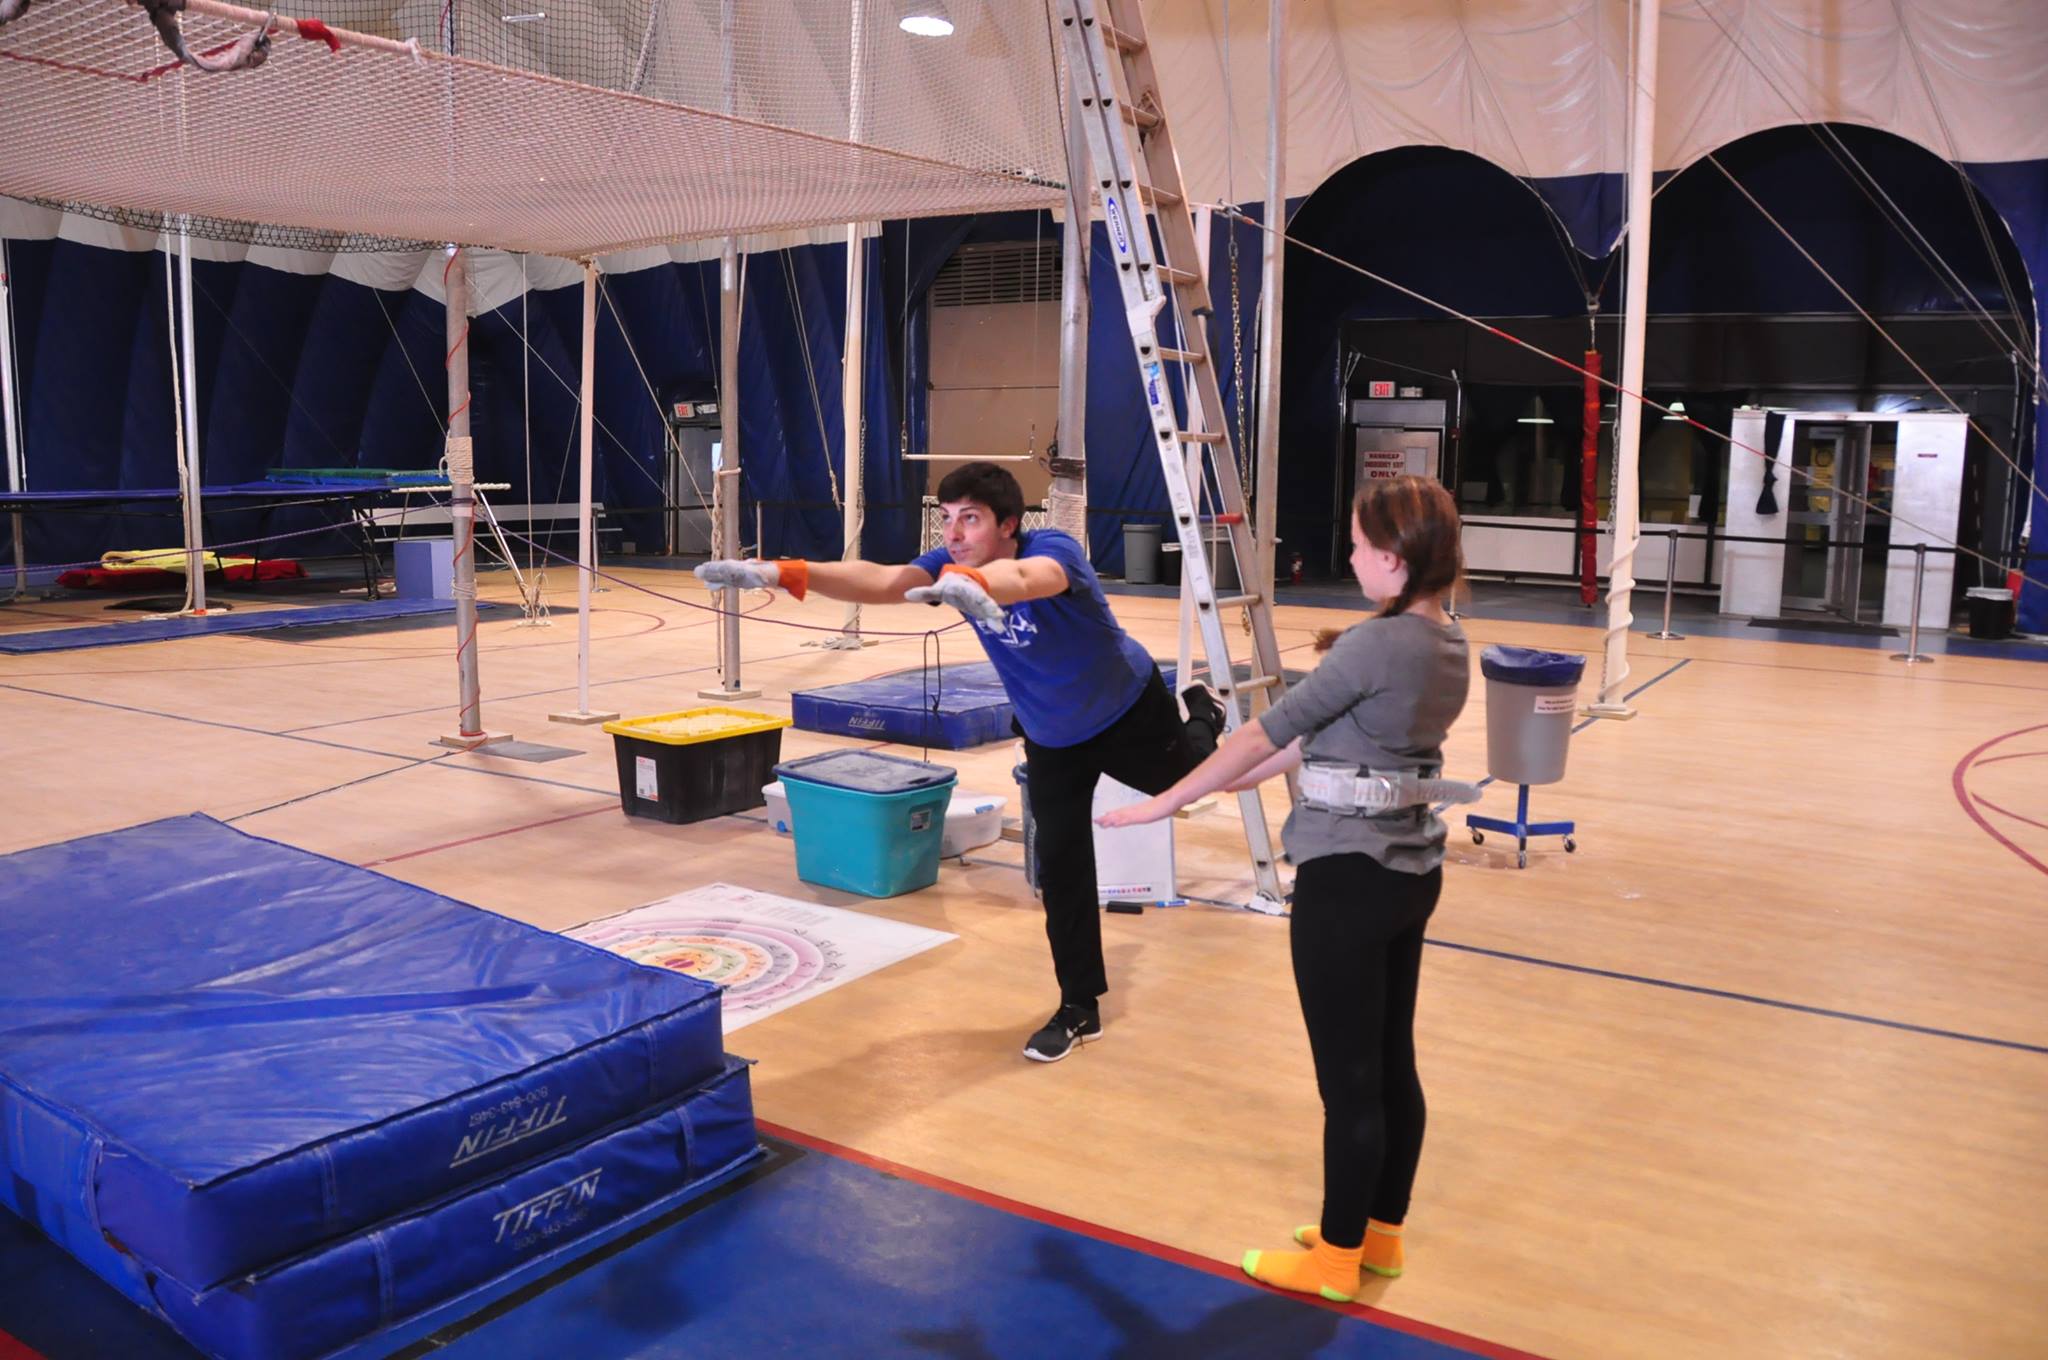 Nick looking goofy as a flying trapeze instructor